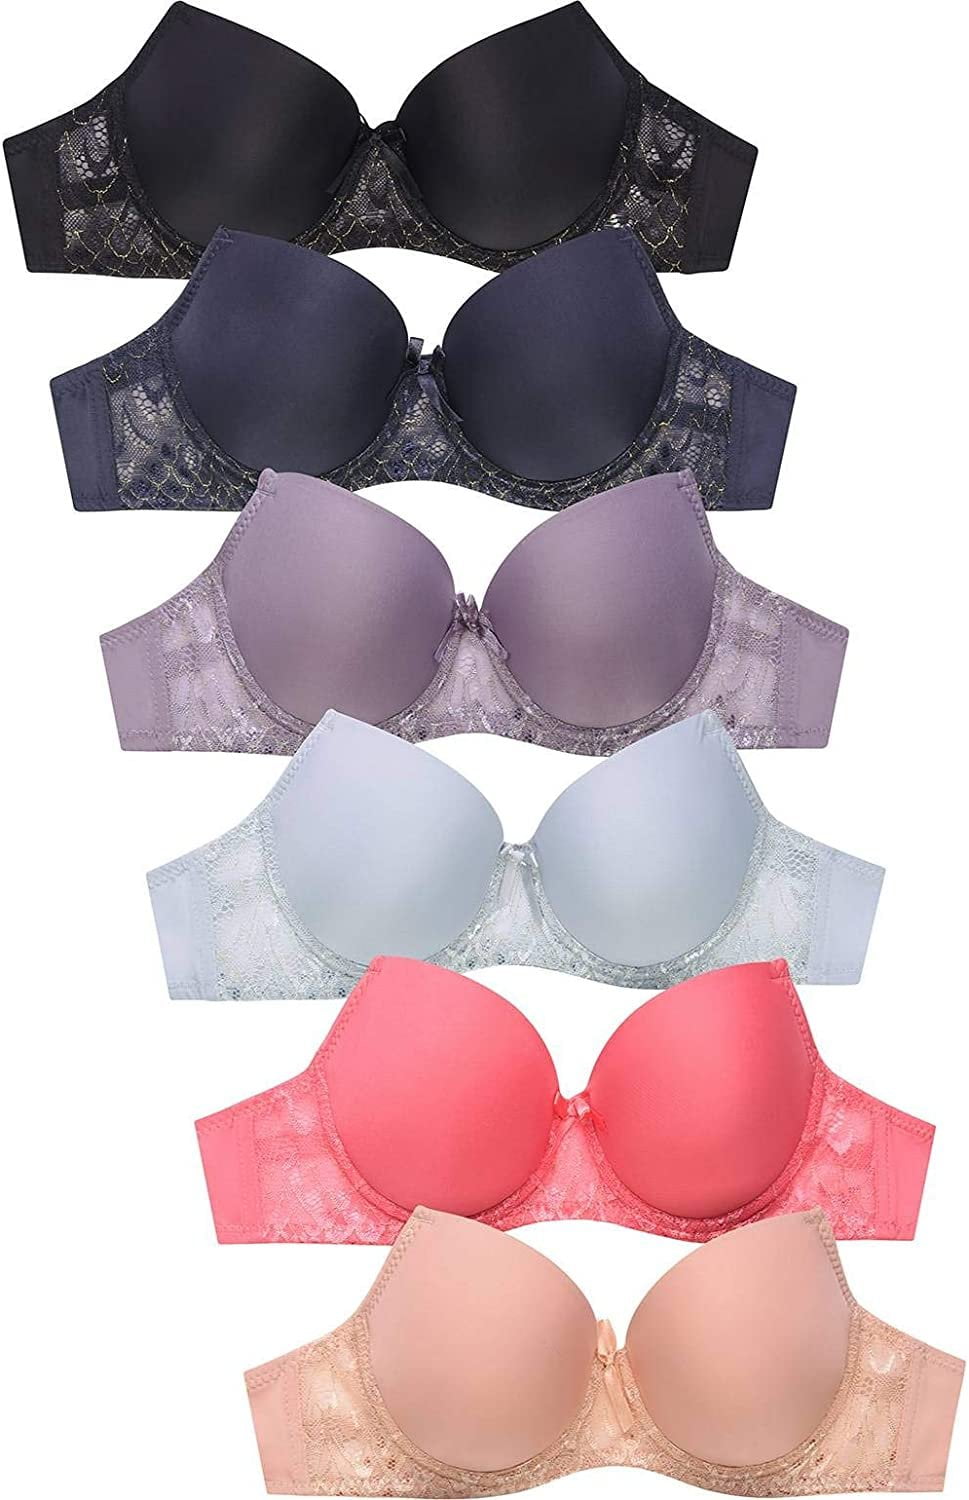 Mamia Womens Basic Laceplain Lace Bras Pack Of 6 Various Styles Claire 34c 